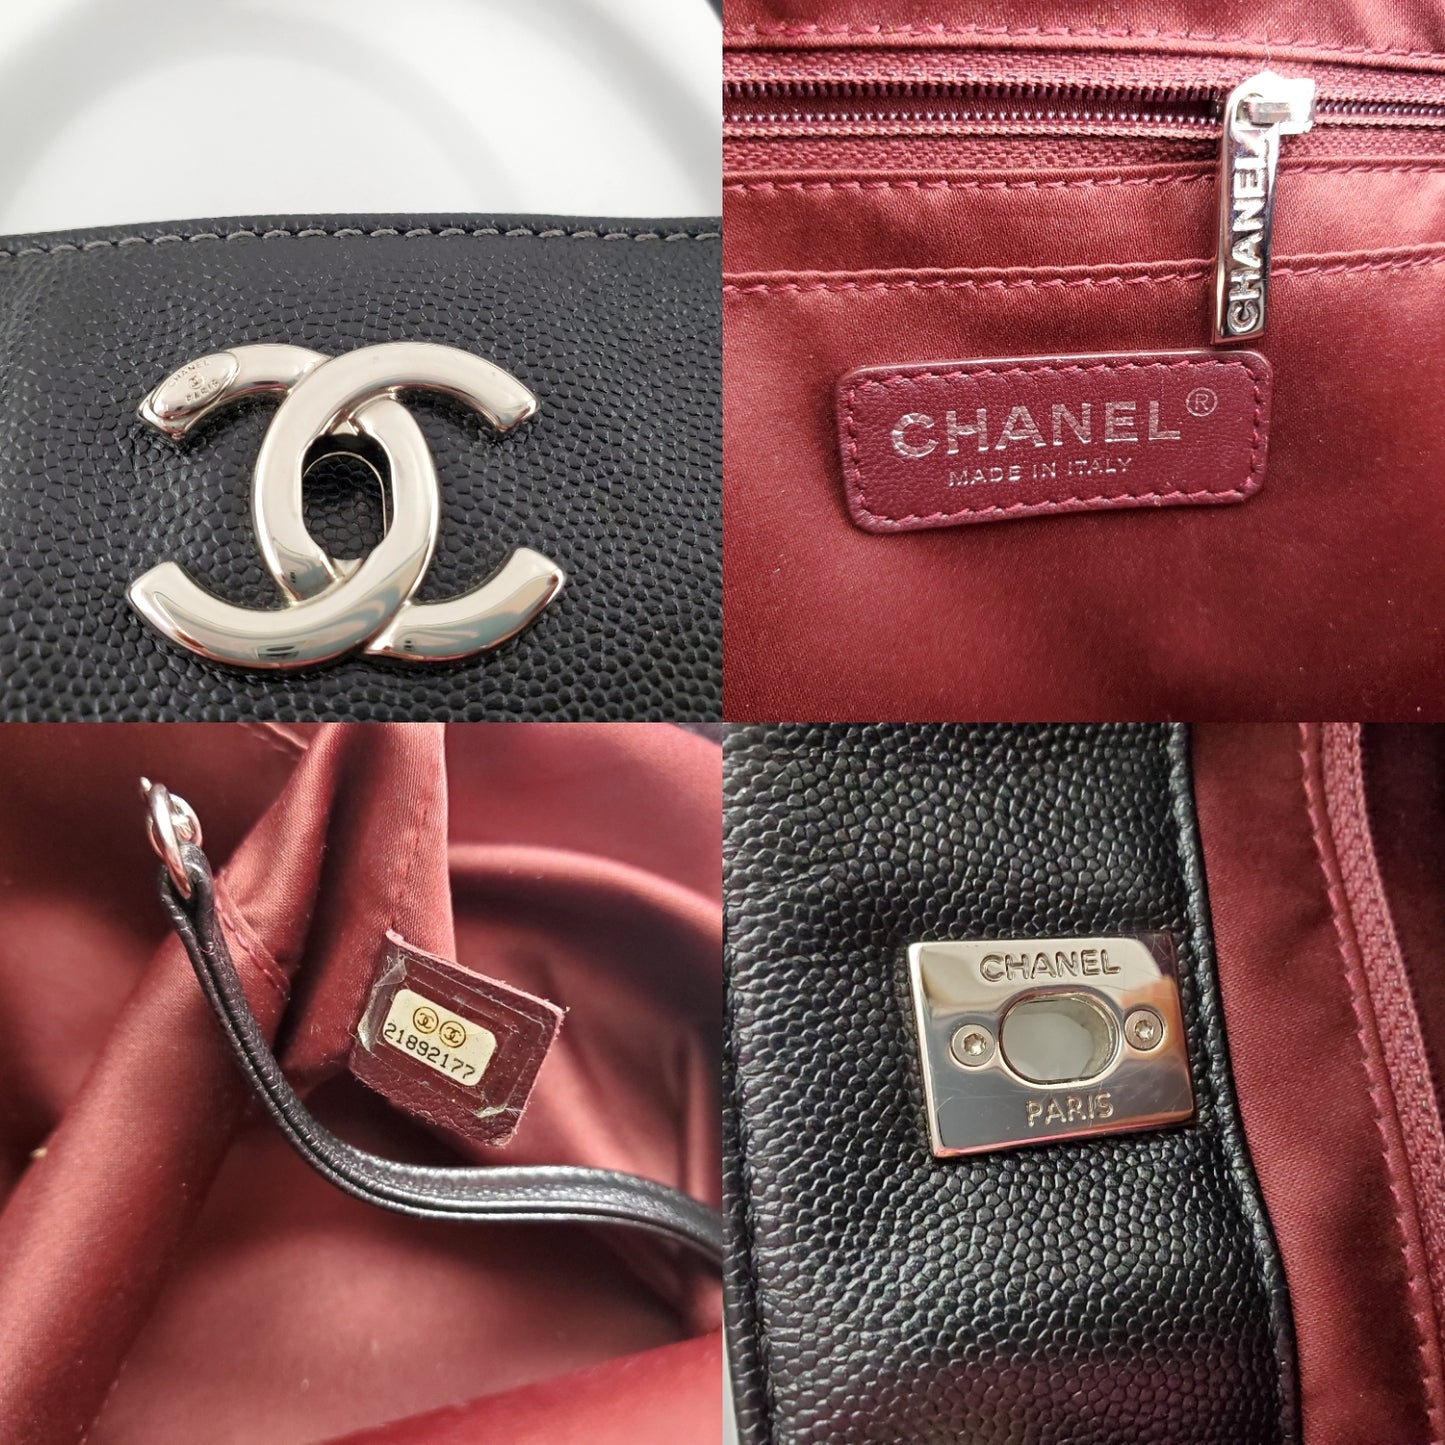 Chanel Large Executive Cerf Shopper Tote